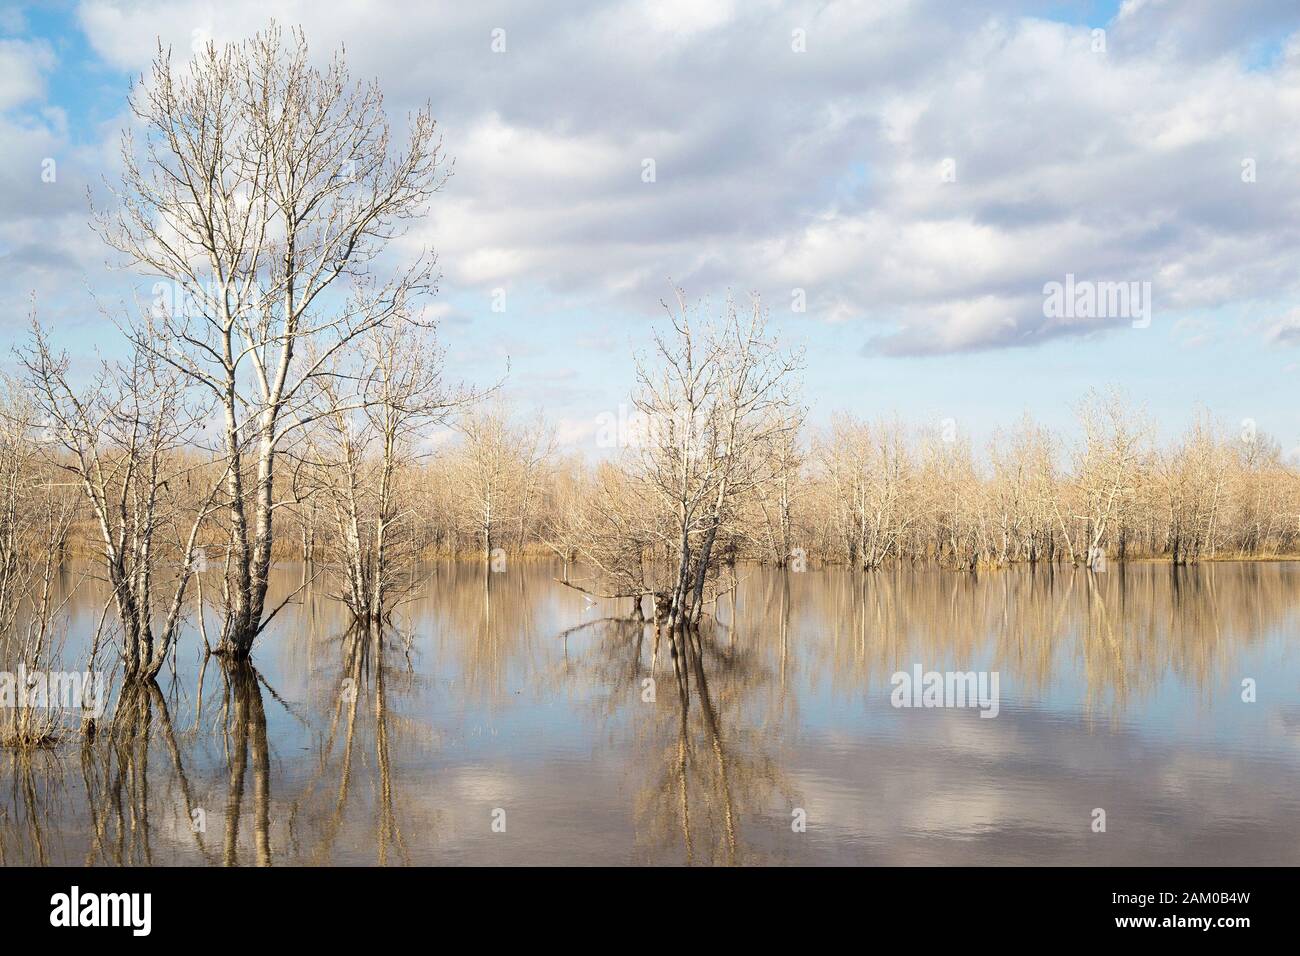 Temporary lake created by spring flooding Stock Photo